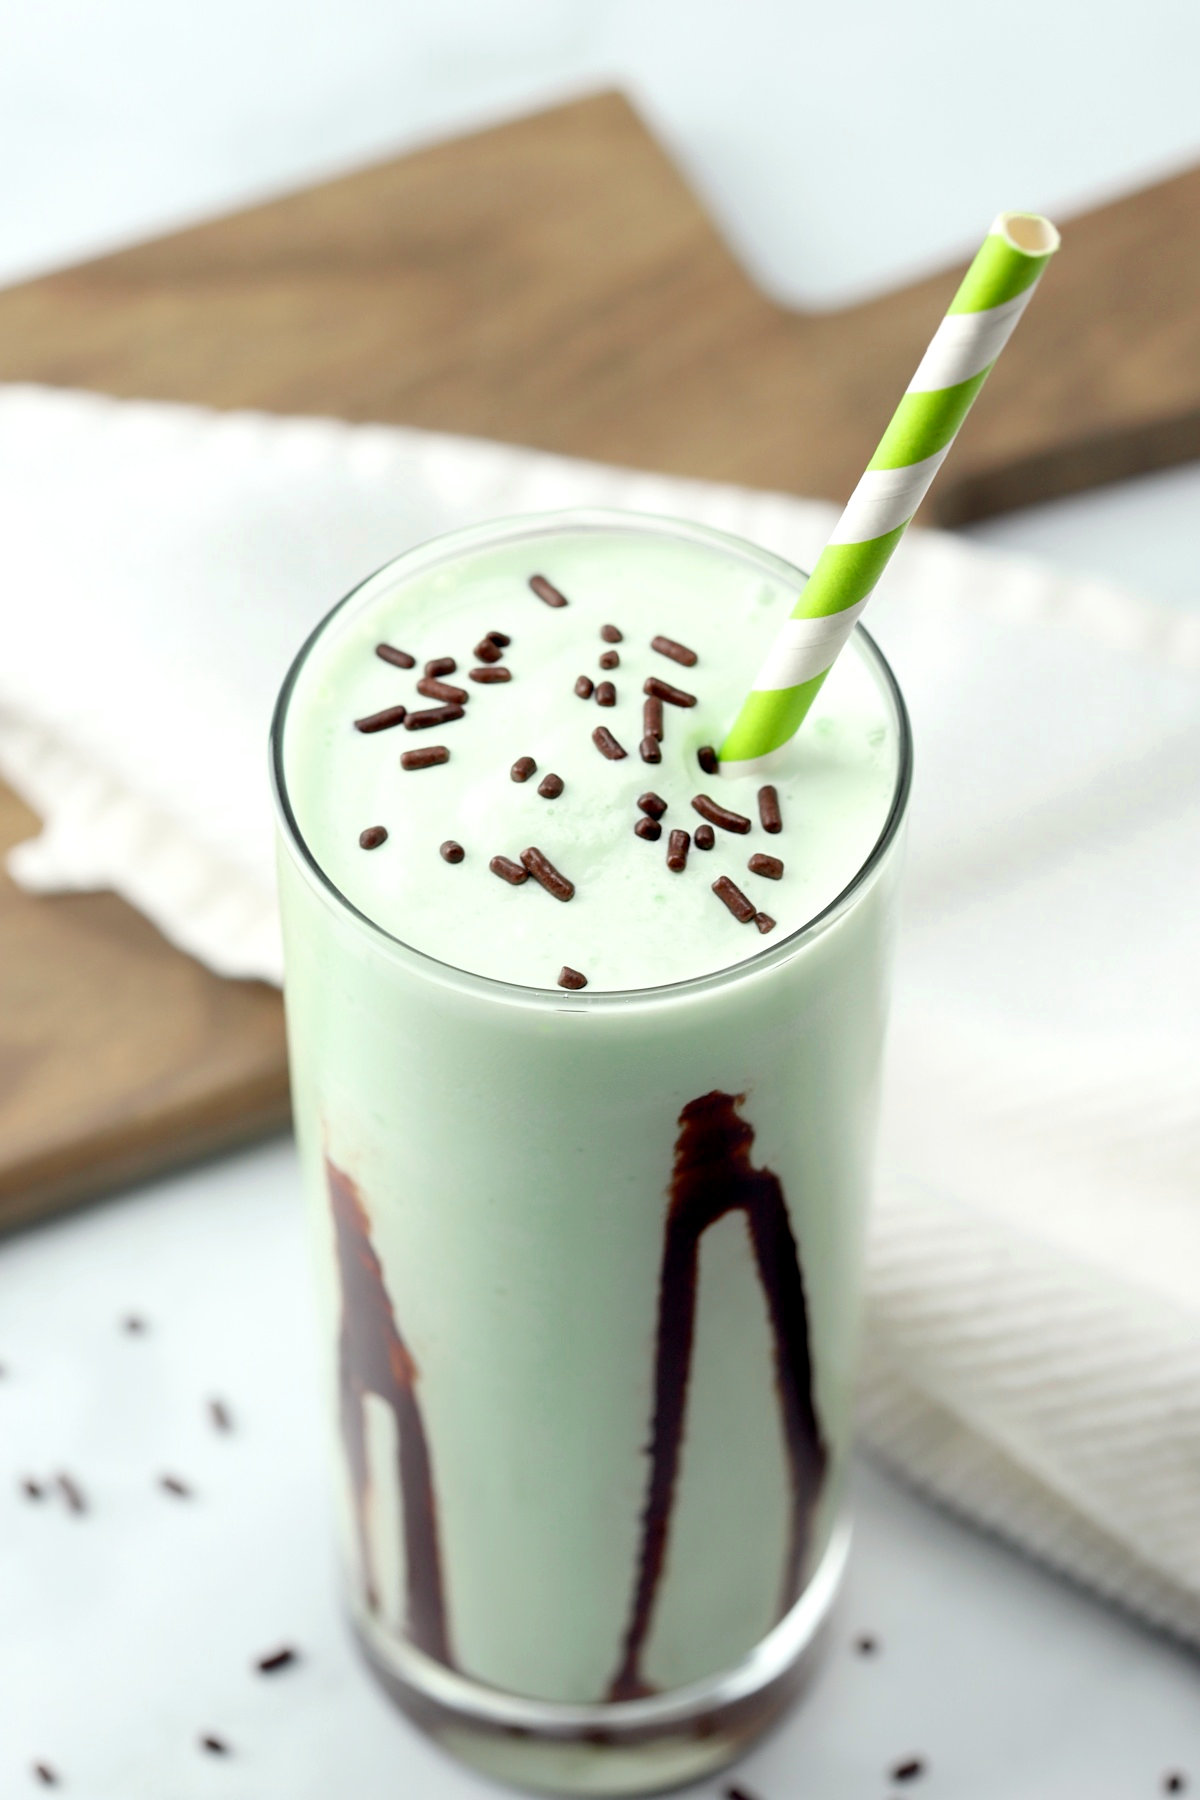 Chocolate sprinkles on top of a frozen green drink.